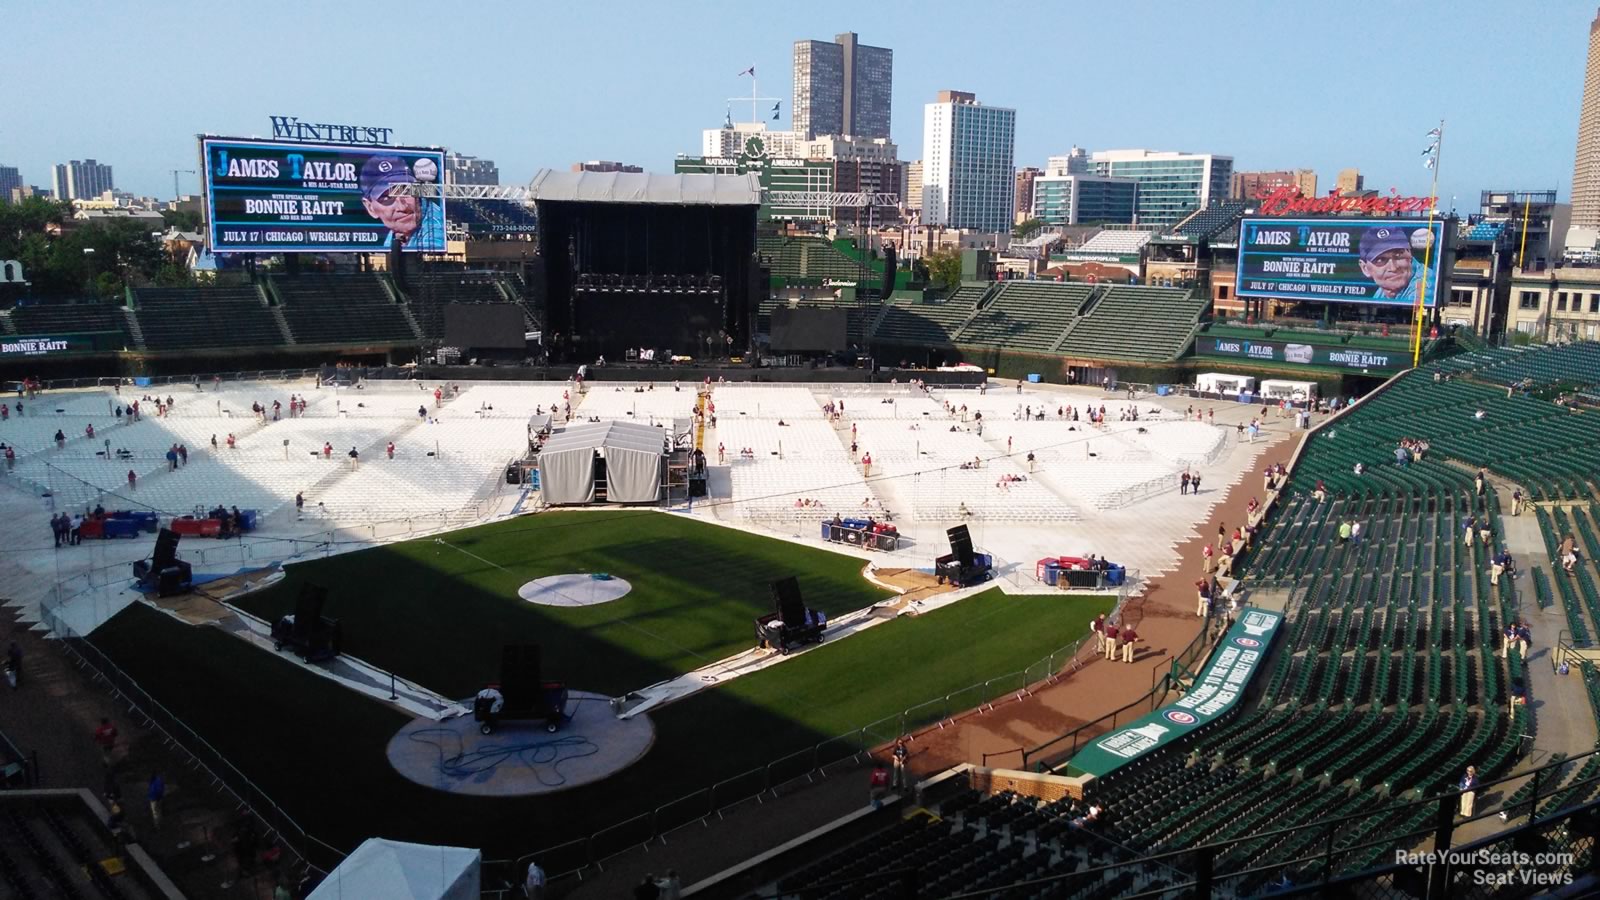 section 319, row 5 seat view  for concert - wrigley field